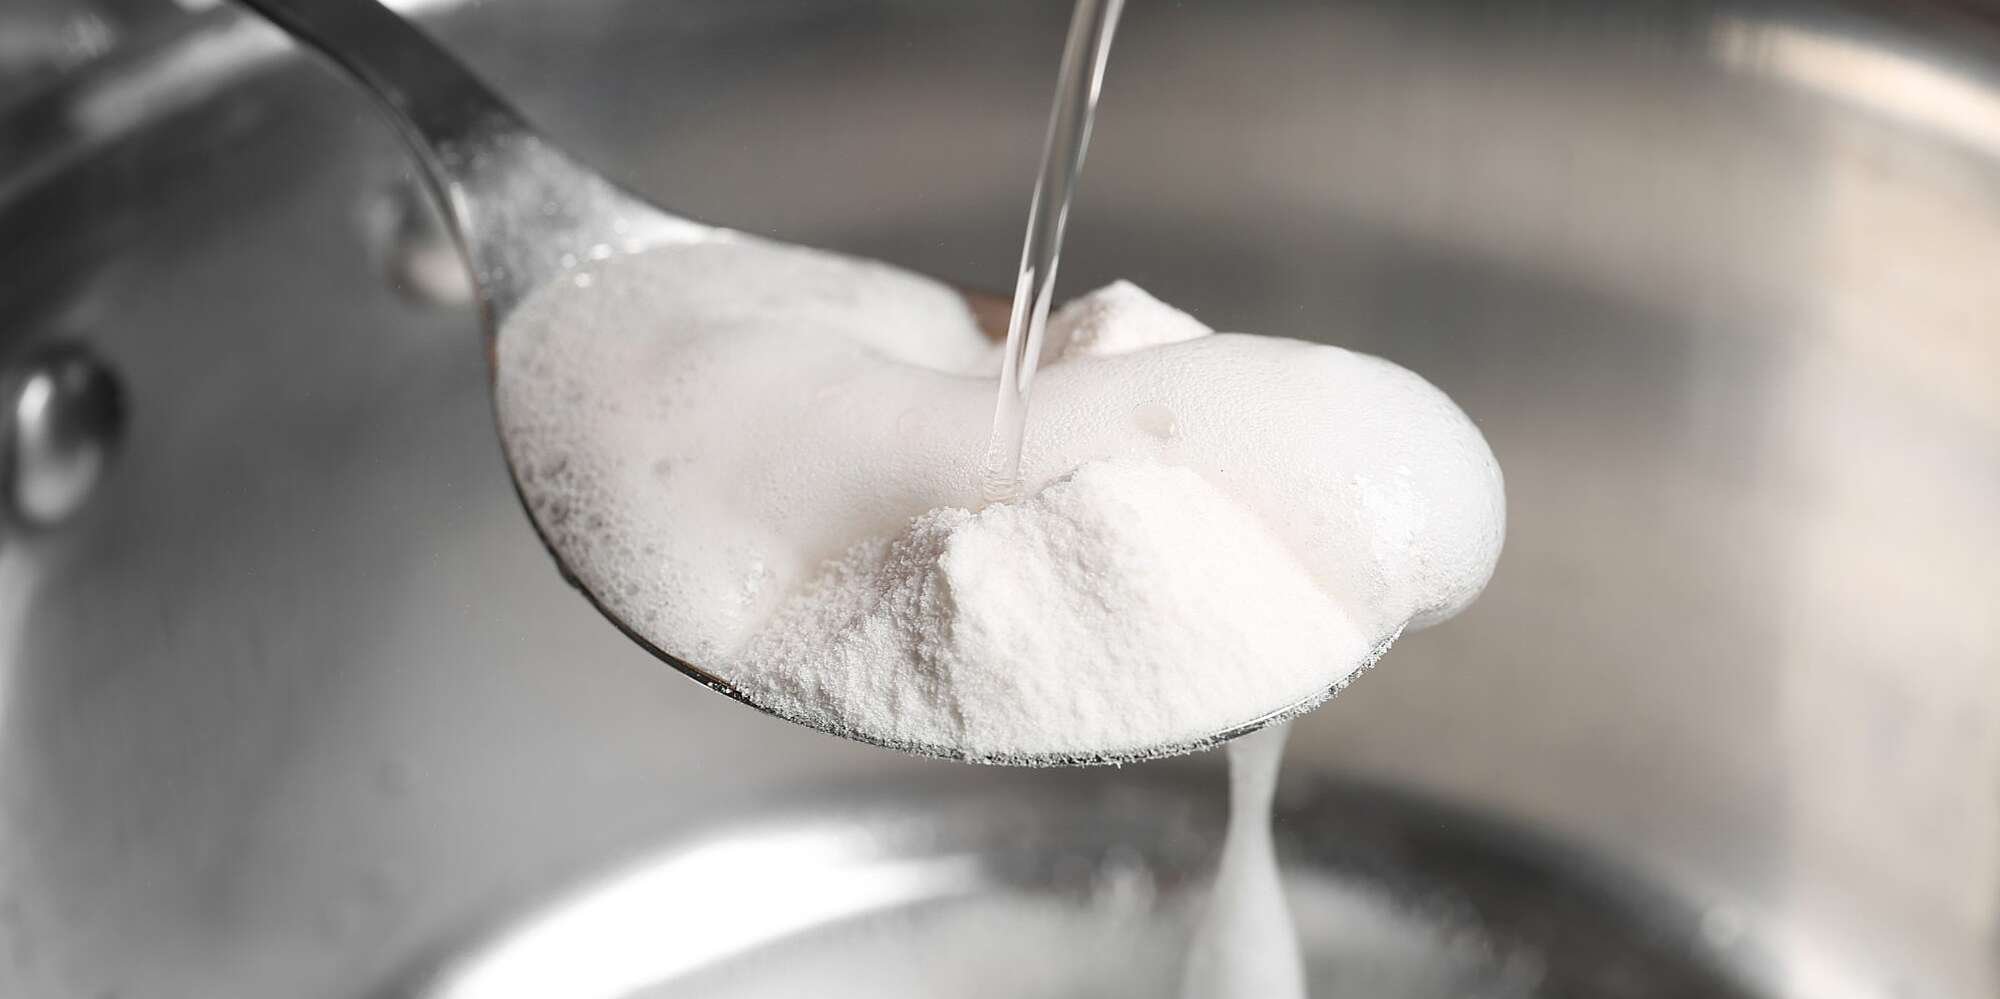 9 Ways to Clean Your Kitchen With Baking Soda